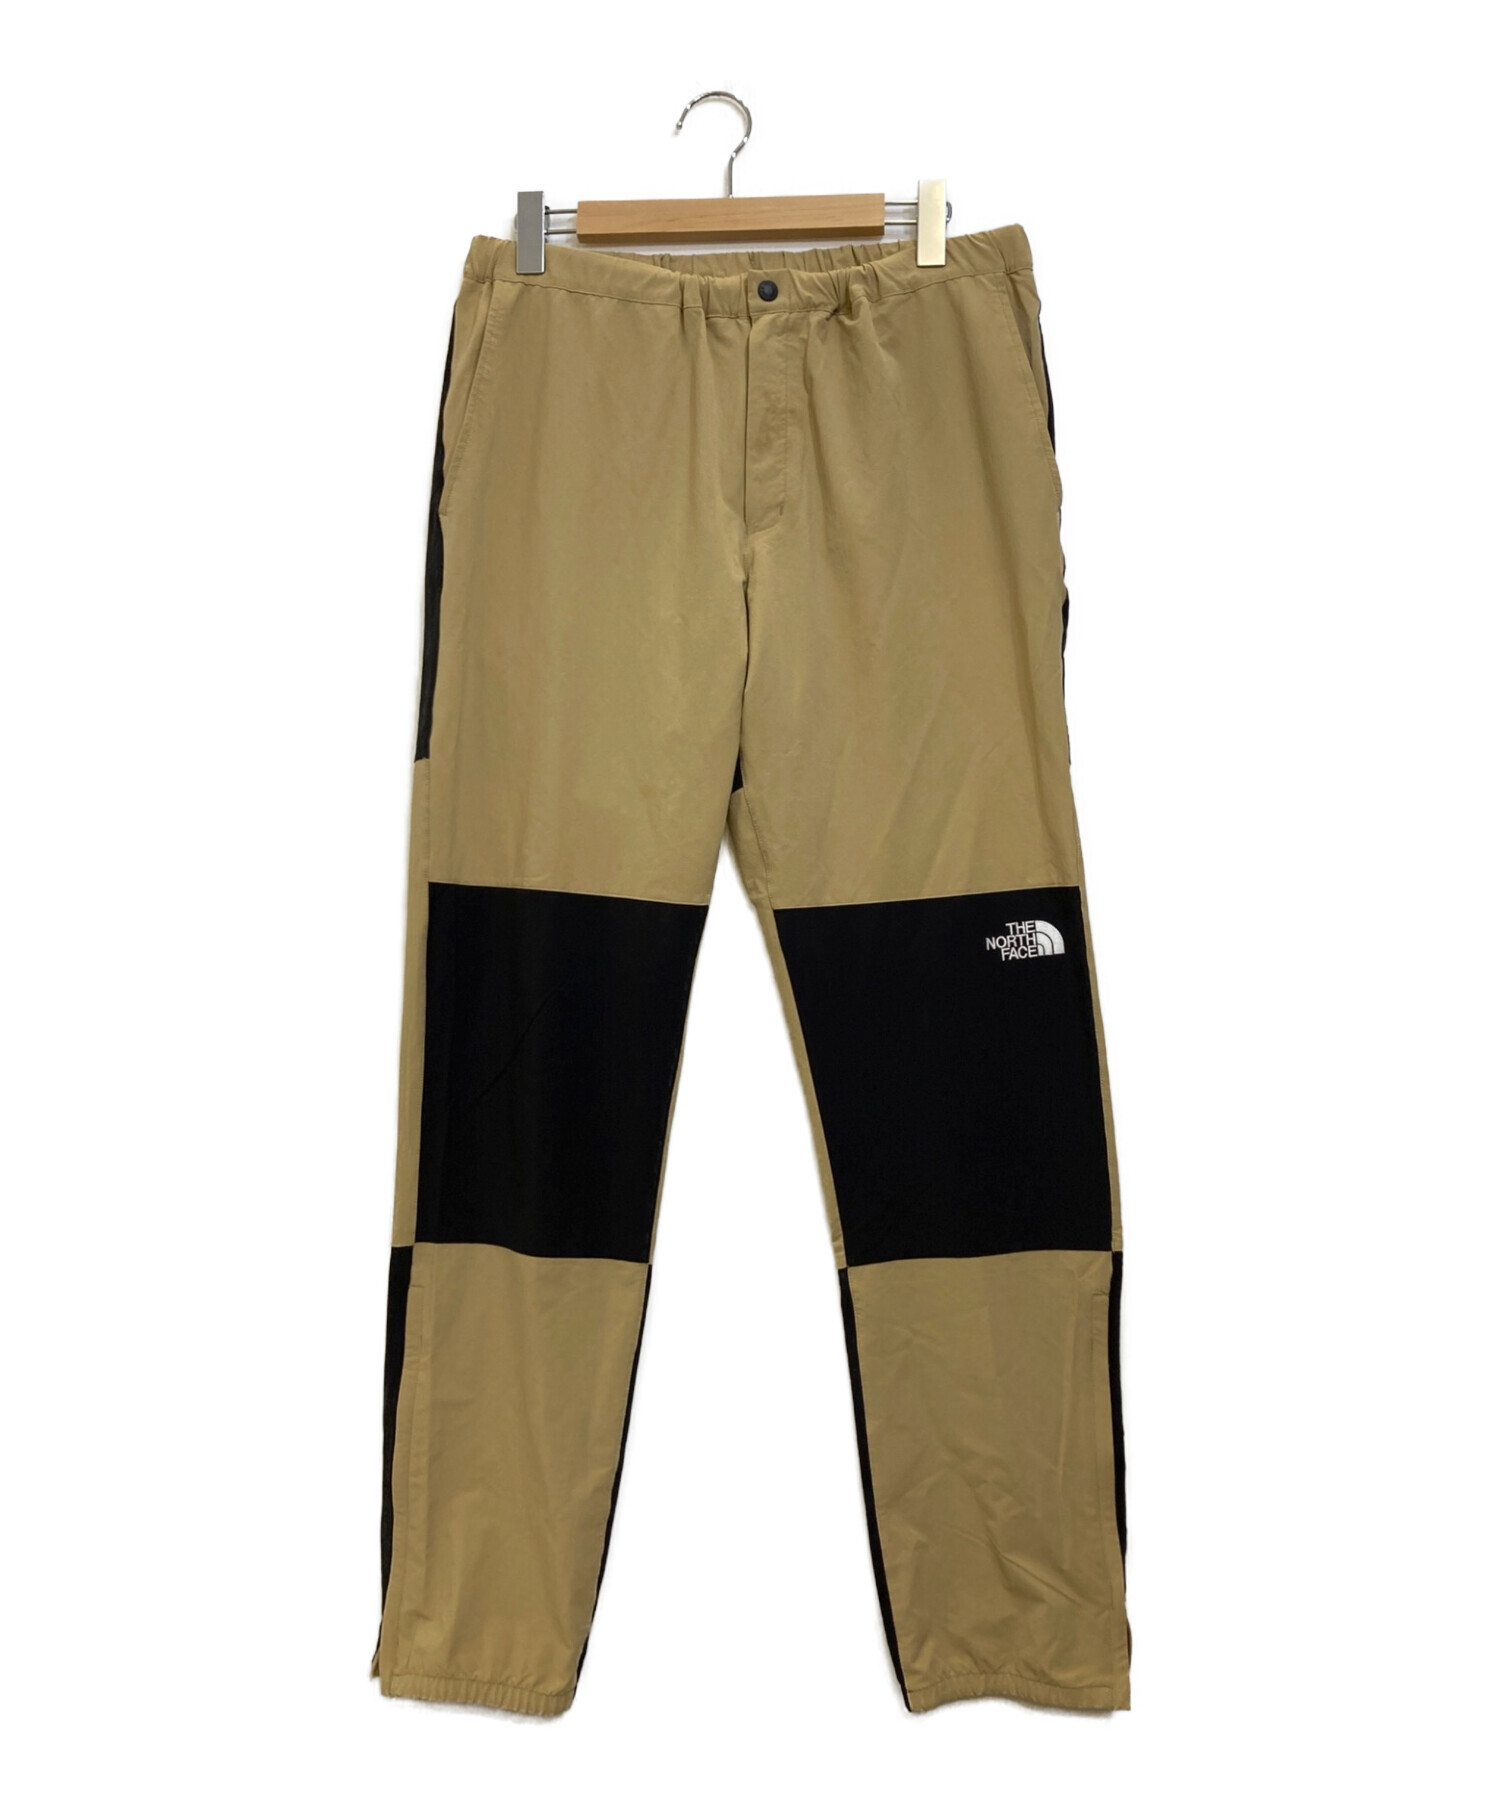 THE NORTH FACE EXPEDITION LIGHT PANT